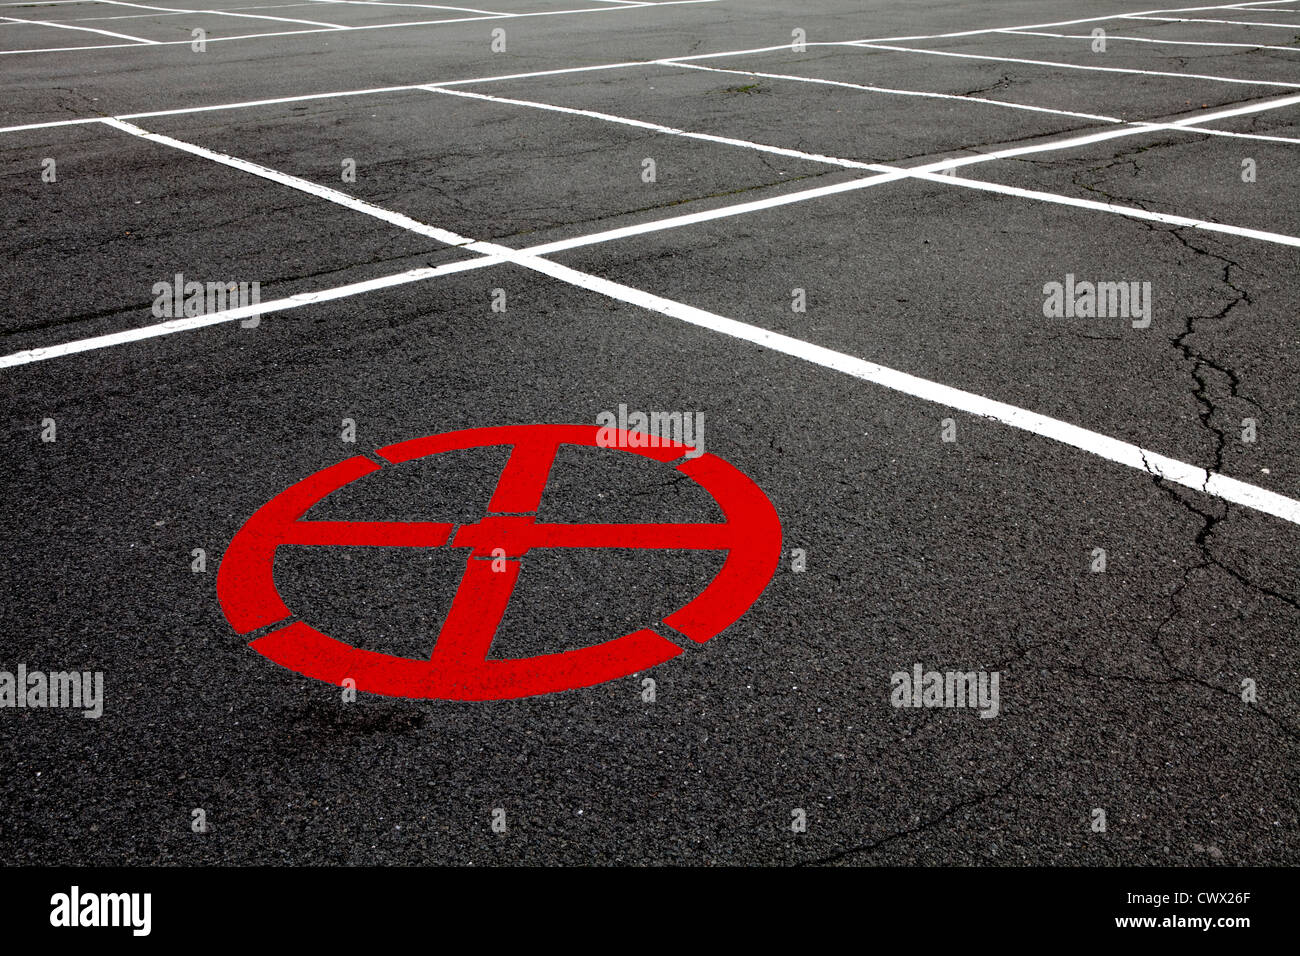 Free parking space with a no parking symbol, concept image, parking spaces, Germany, Europe Stock Photo